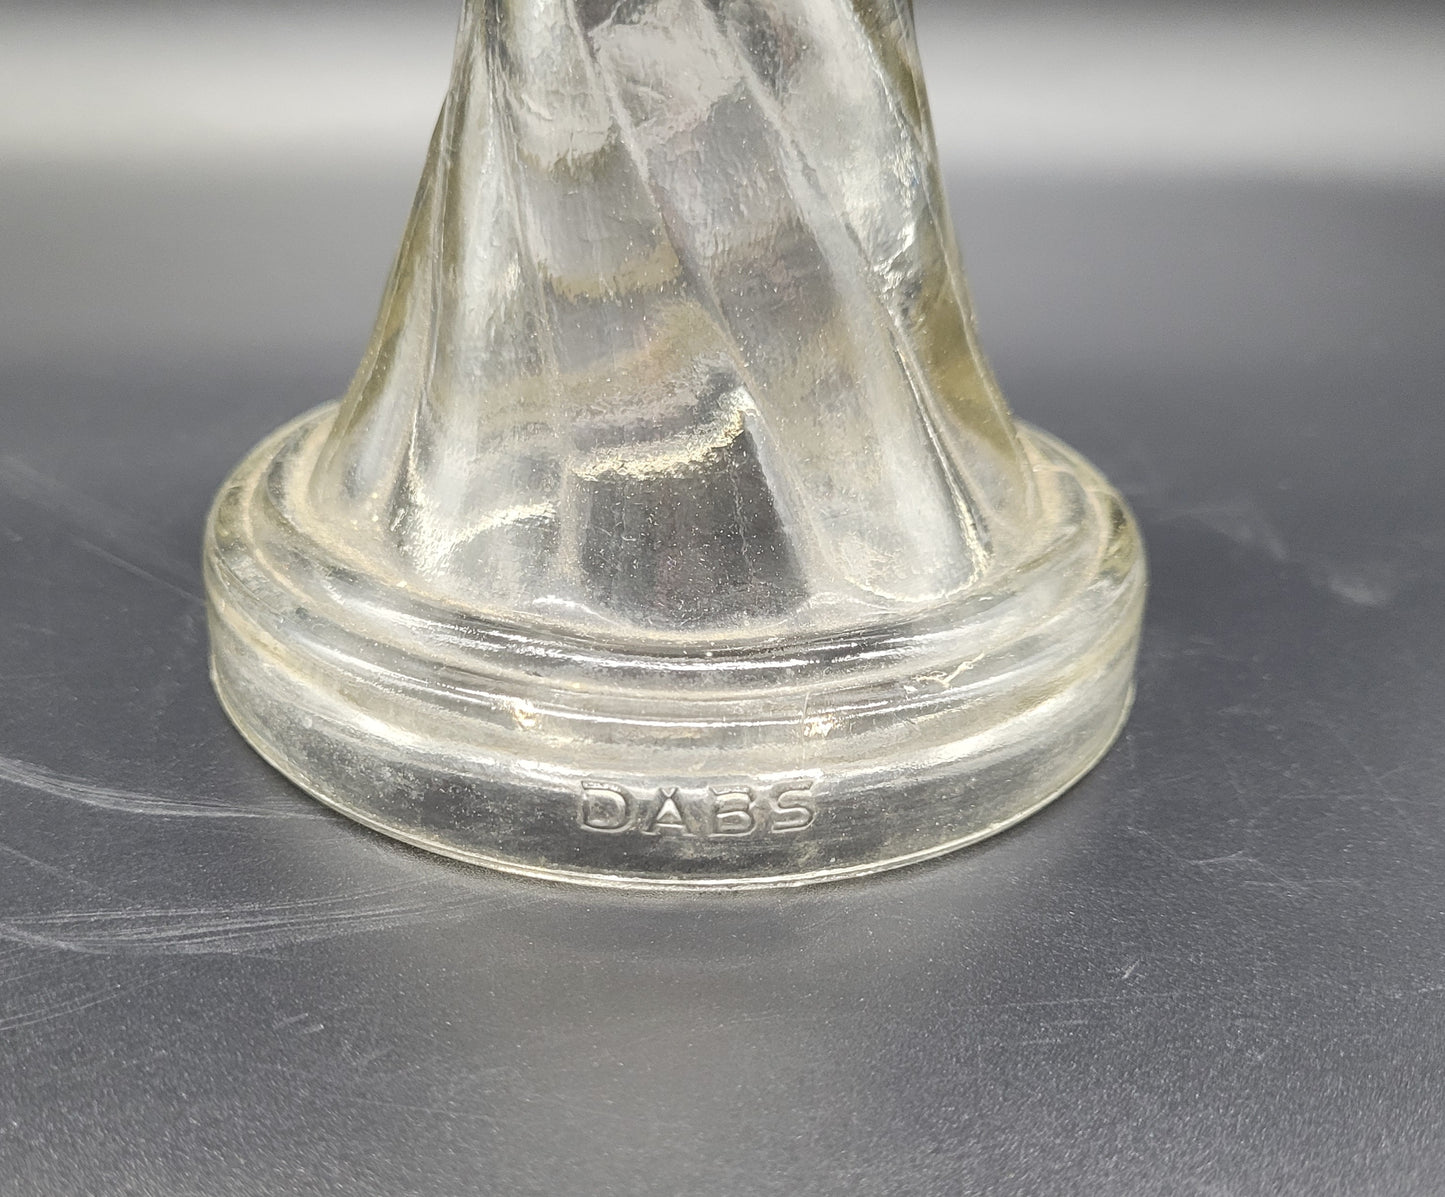 A Rare and Beautiful "Dabbs" Brand Oil Lamp made in Portugal in the late 1800s